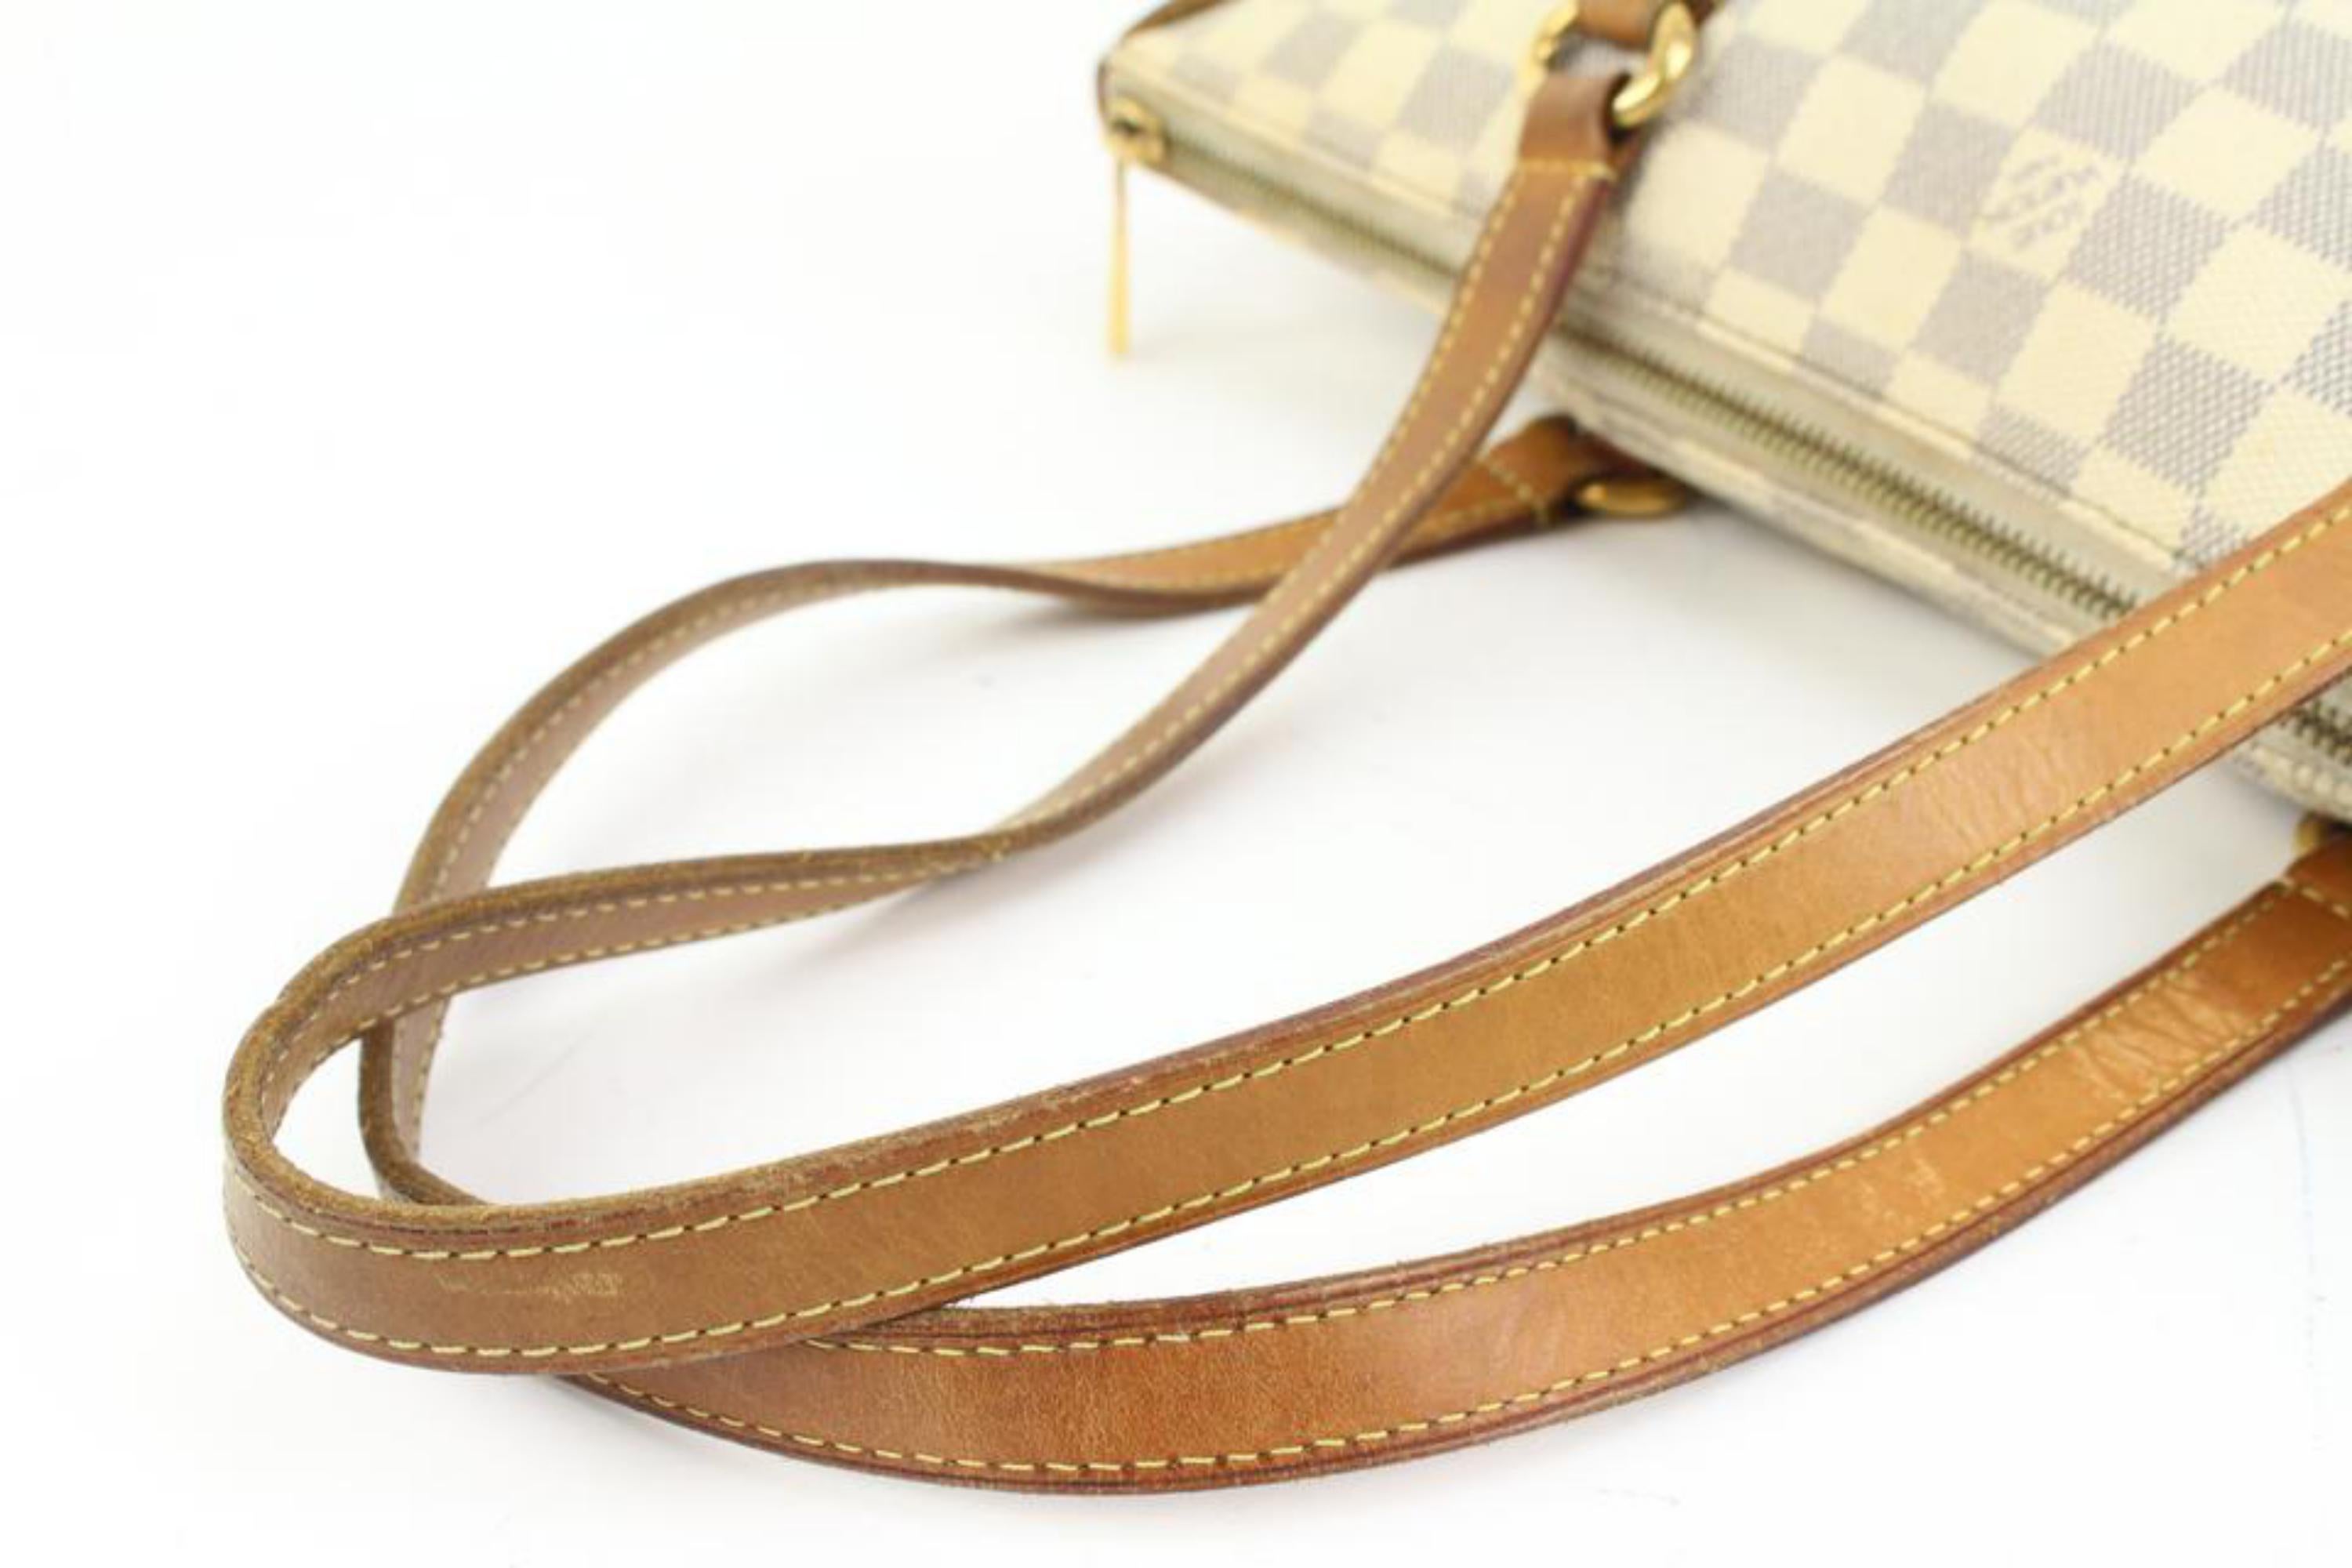 Louis Vuitton Damier Azur Totally PM Zip Tote Shoulder Bag 90lz418s
Date Code/Serial Number: DU2131
Made In: France
Measurements: Length:  14.5